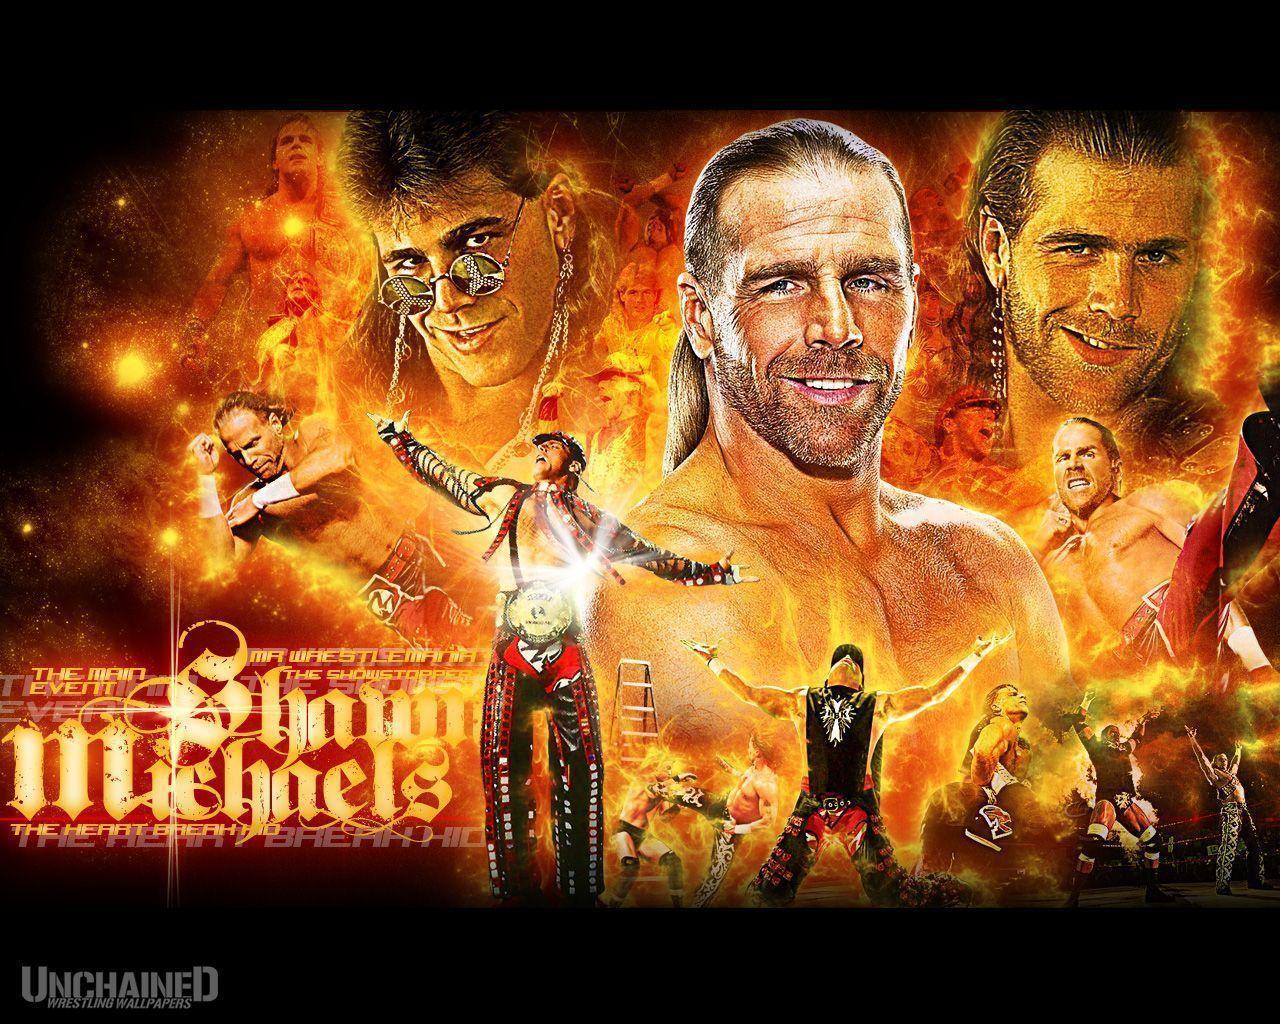 WWE Shawn Michaels "Legendary" Wallpapers ~ Unchained